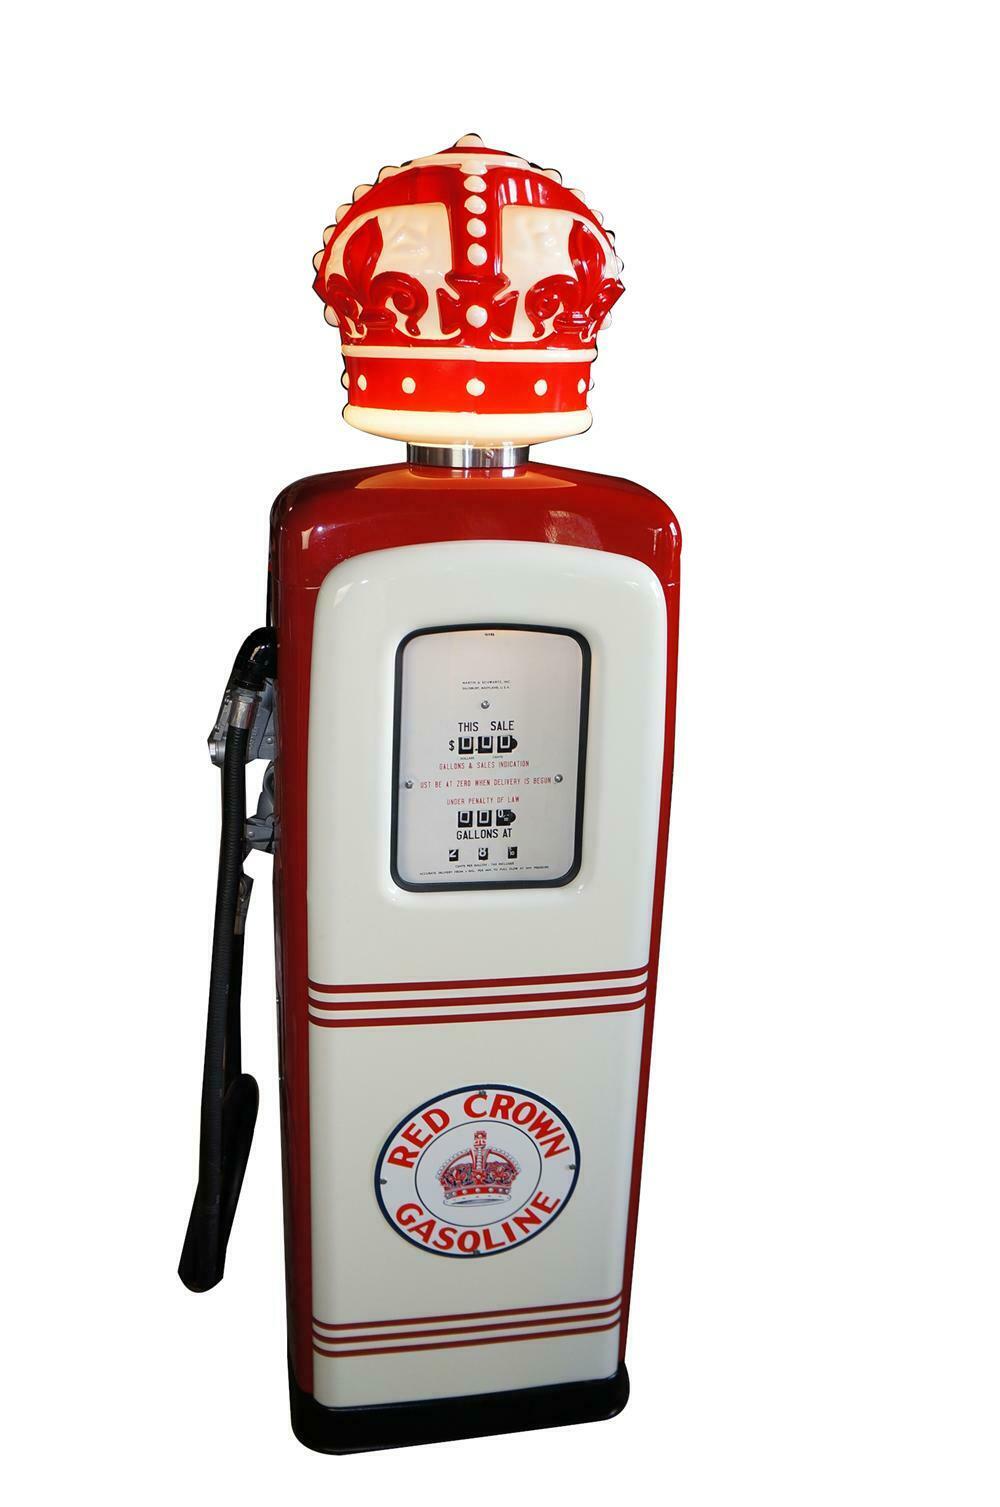 red crown gas pump for sale